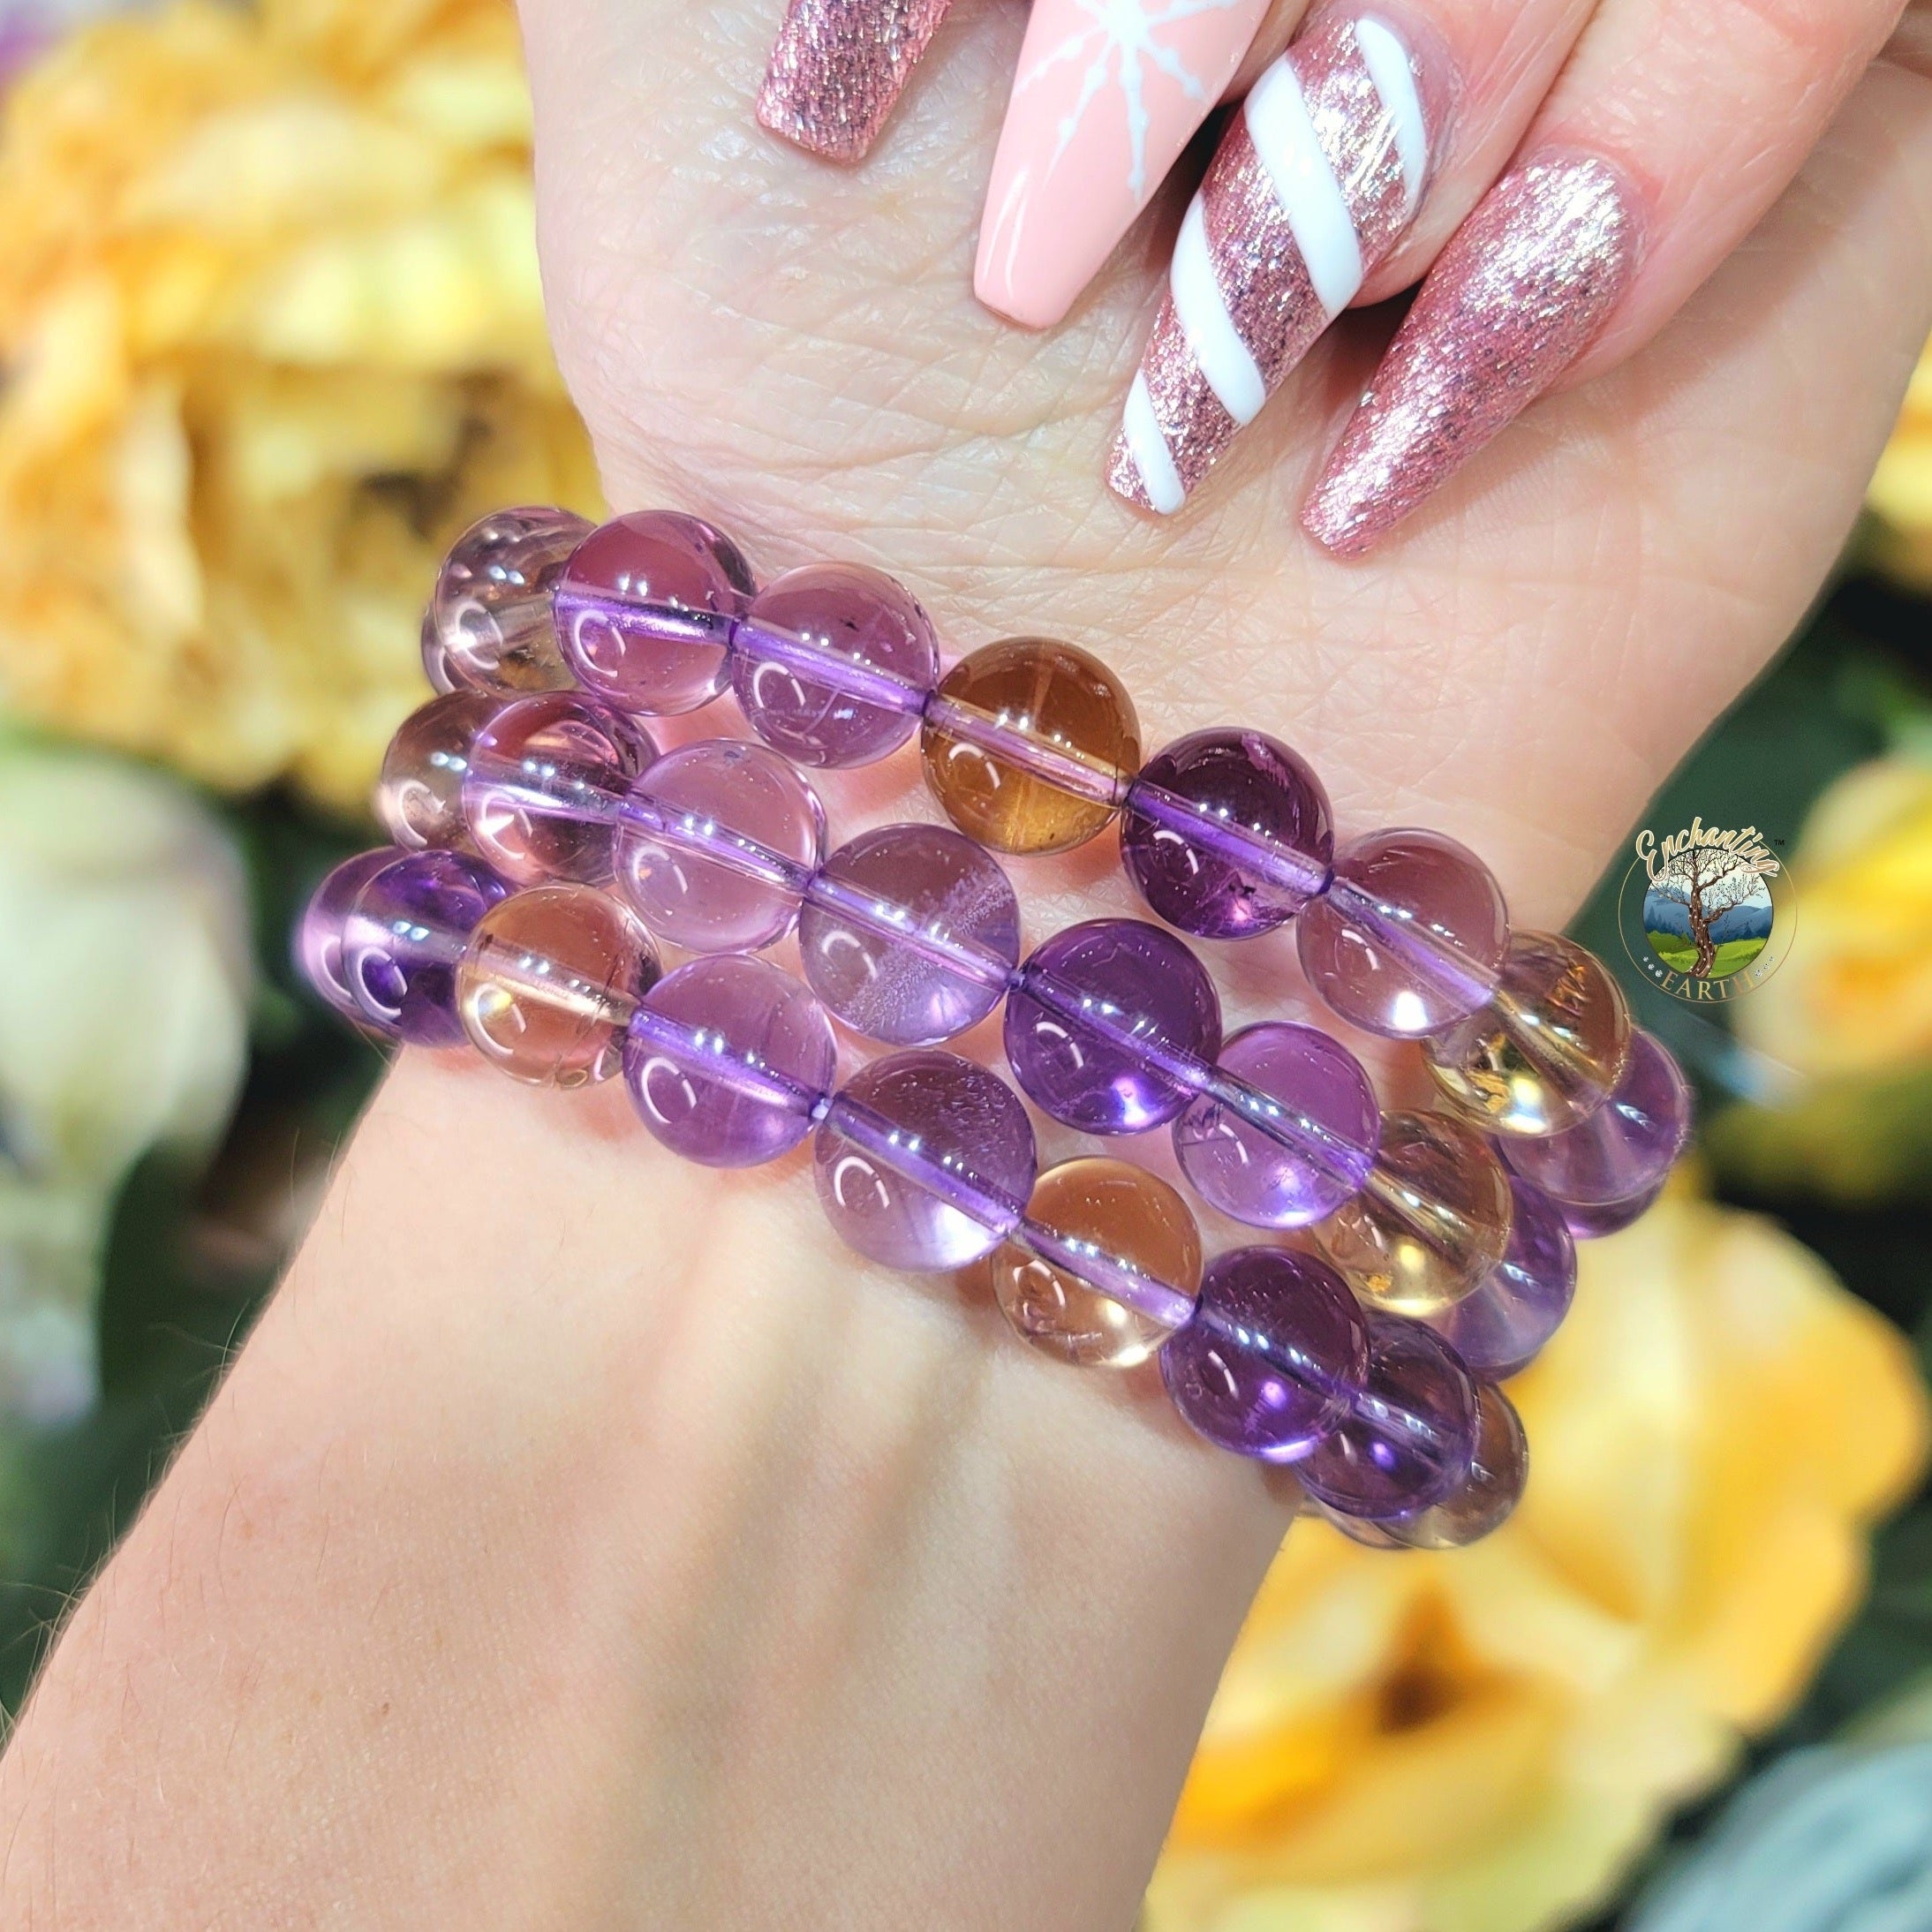 AAA Ametrine Bracelet for Action & Empowerment to Pursue Your Dreams